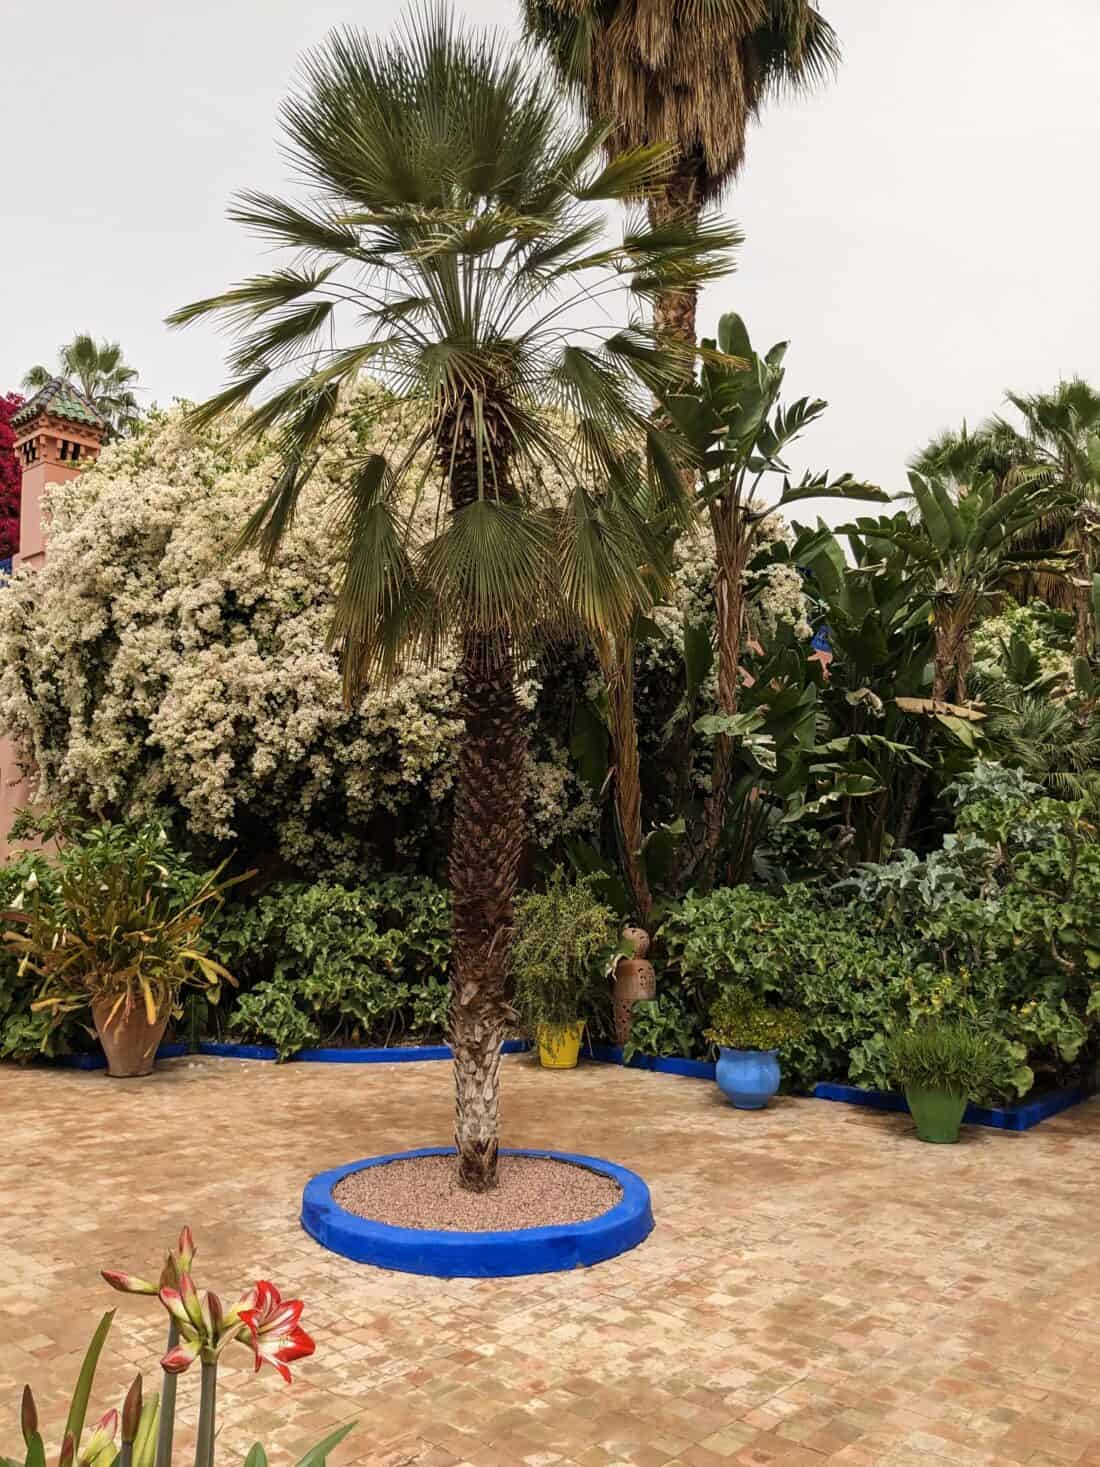 Palm tree surrounded by lush vegetation with a blue circular border in a garden setting.